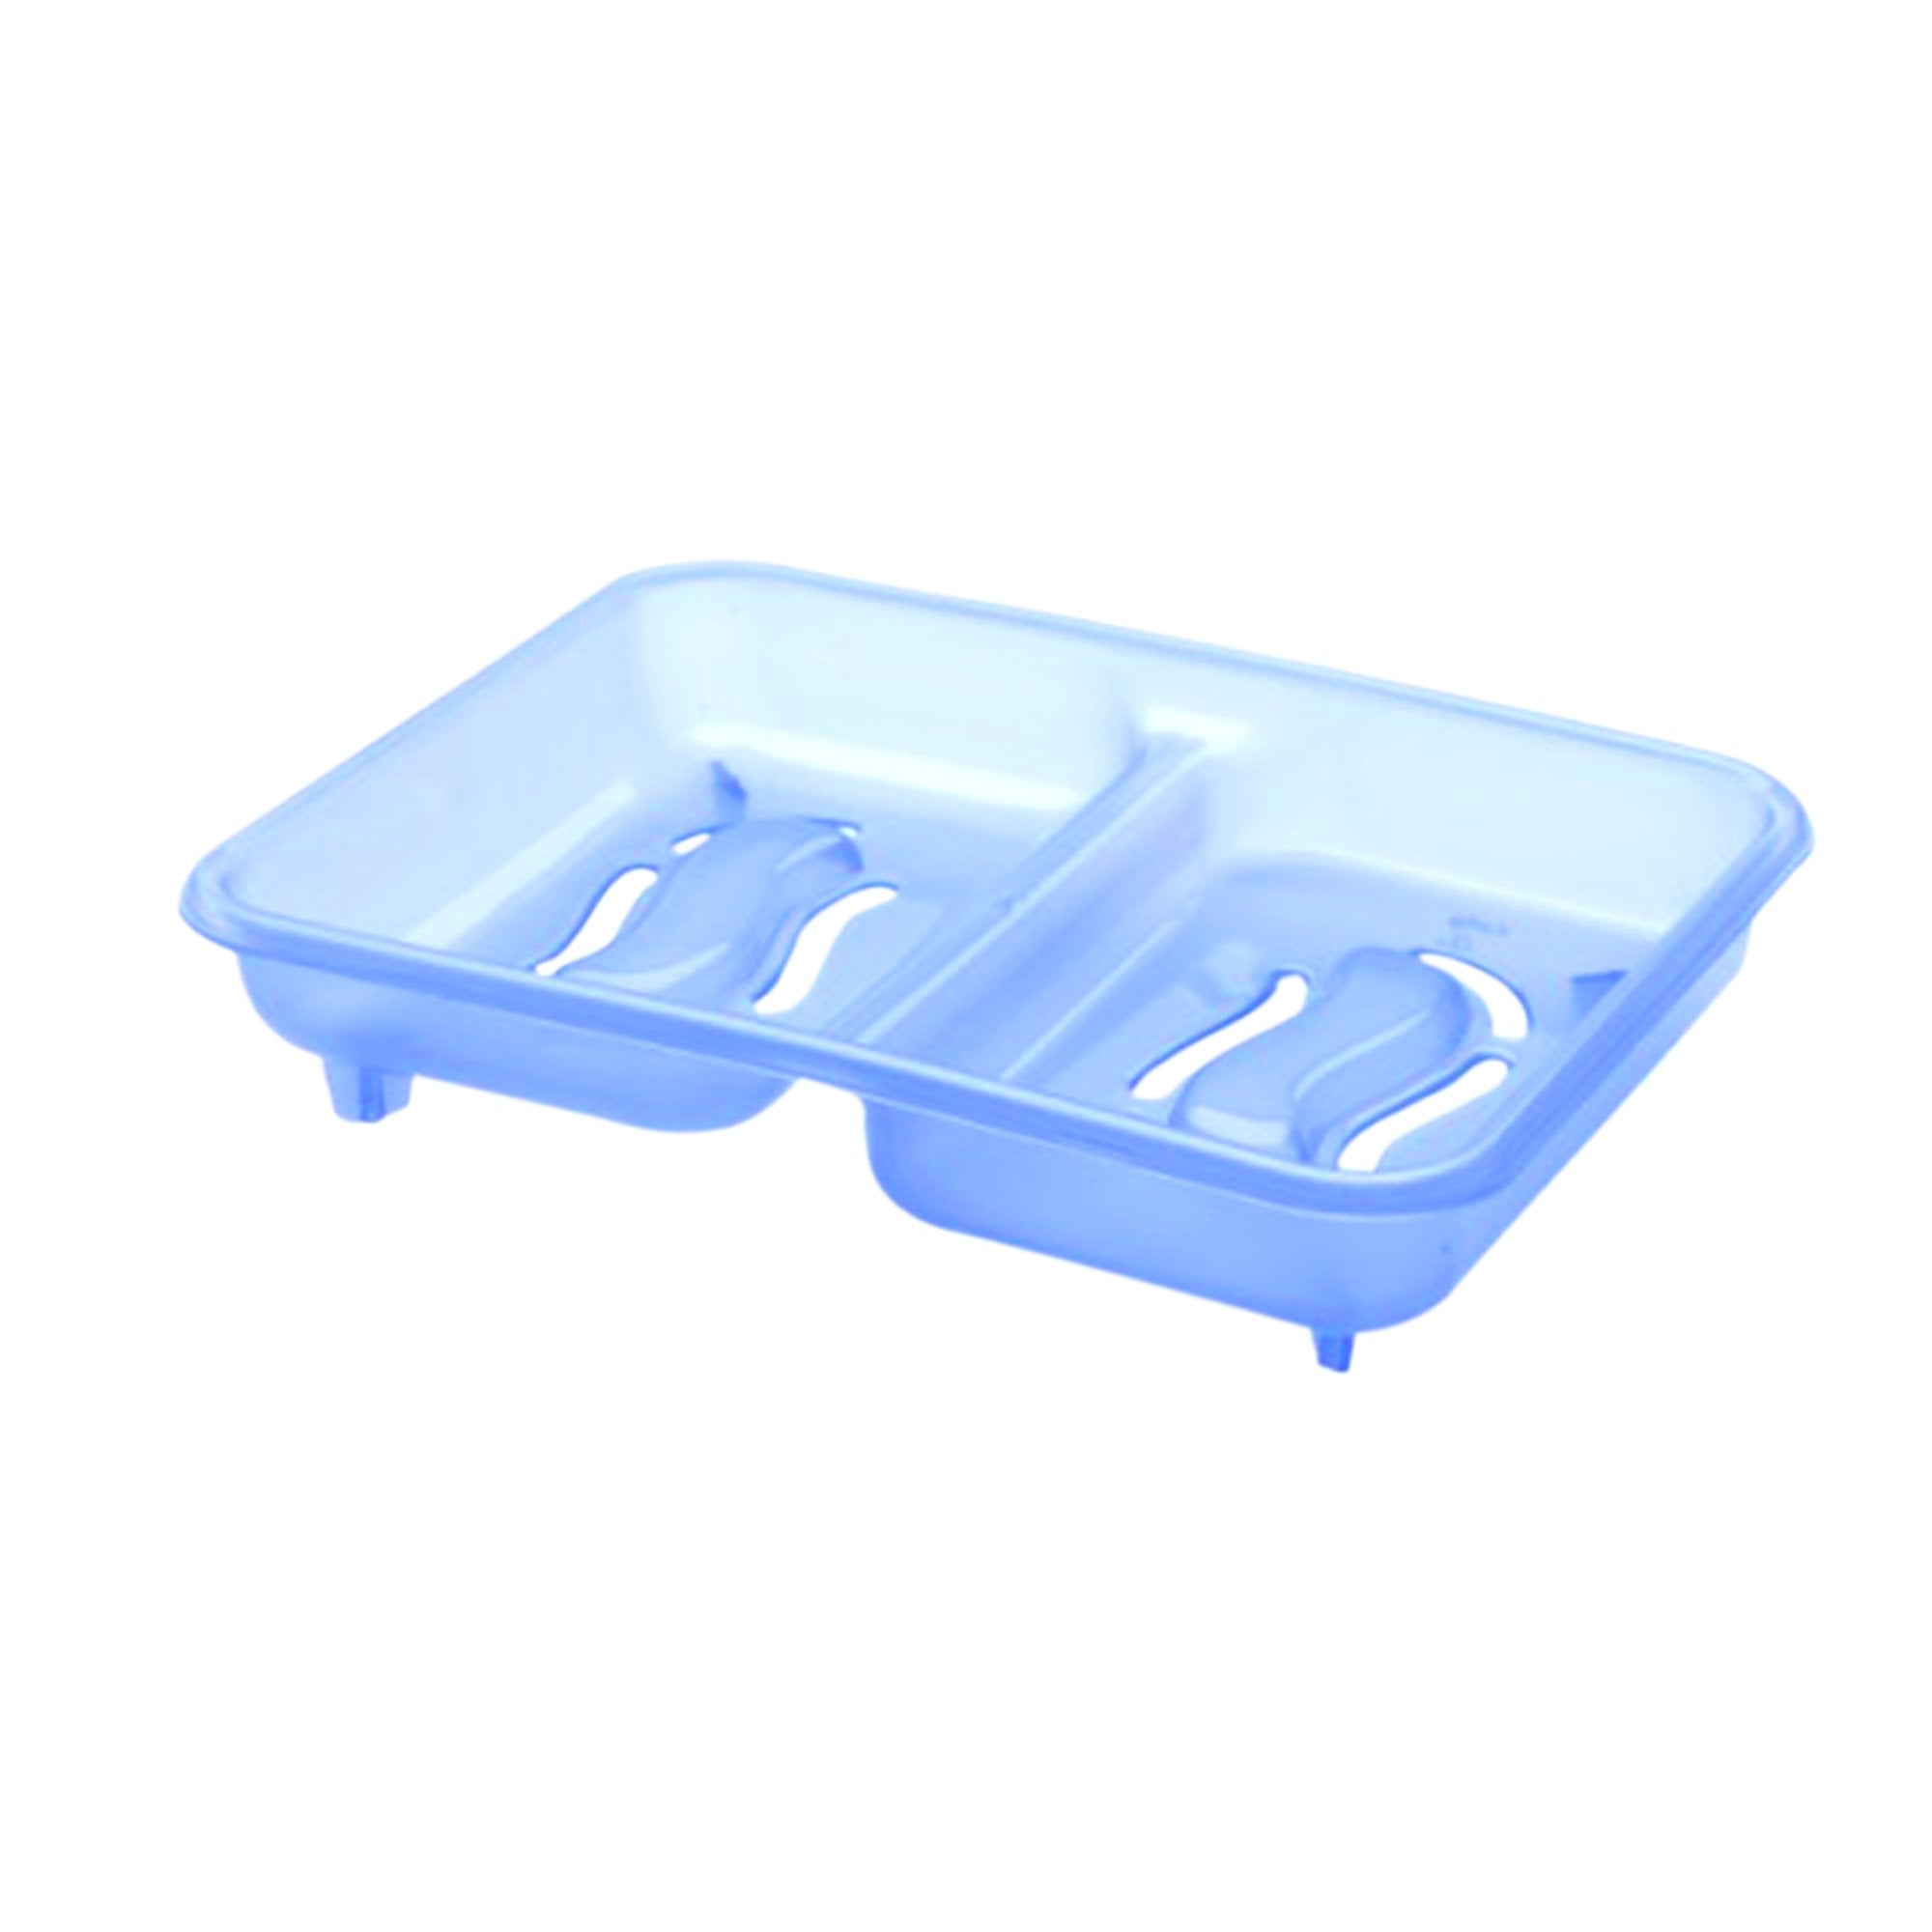 3653 2 in 1 Soap keeping Plastic Holder for Bathroom use - SkyShopy